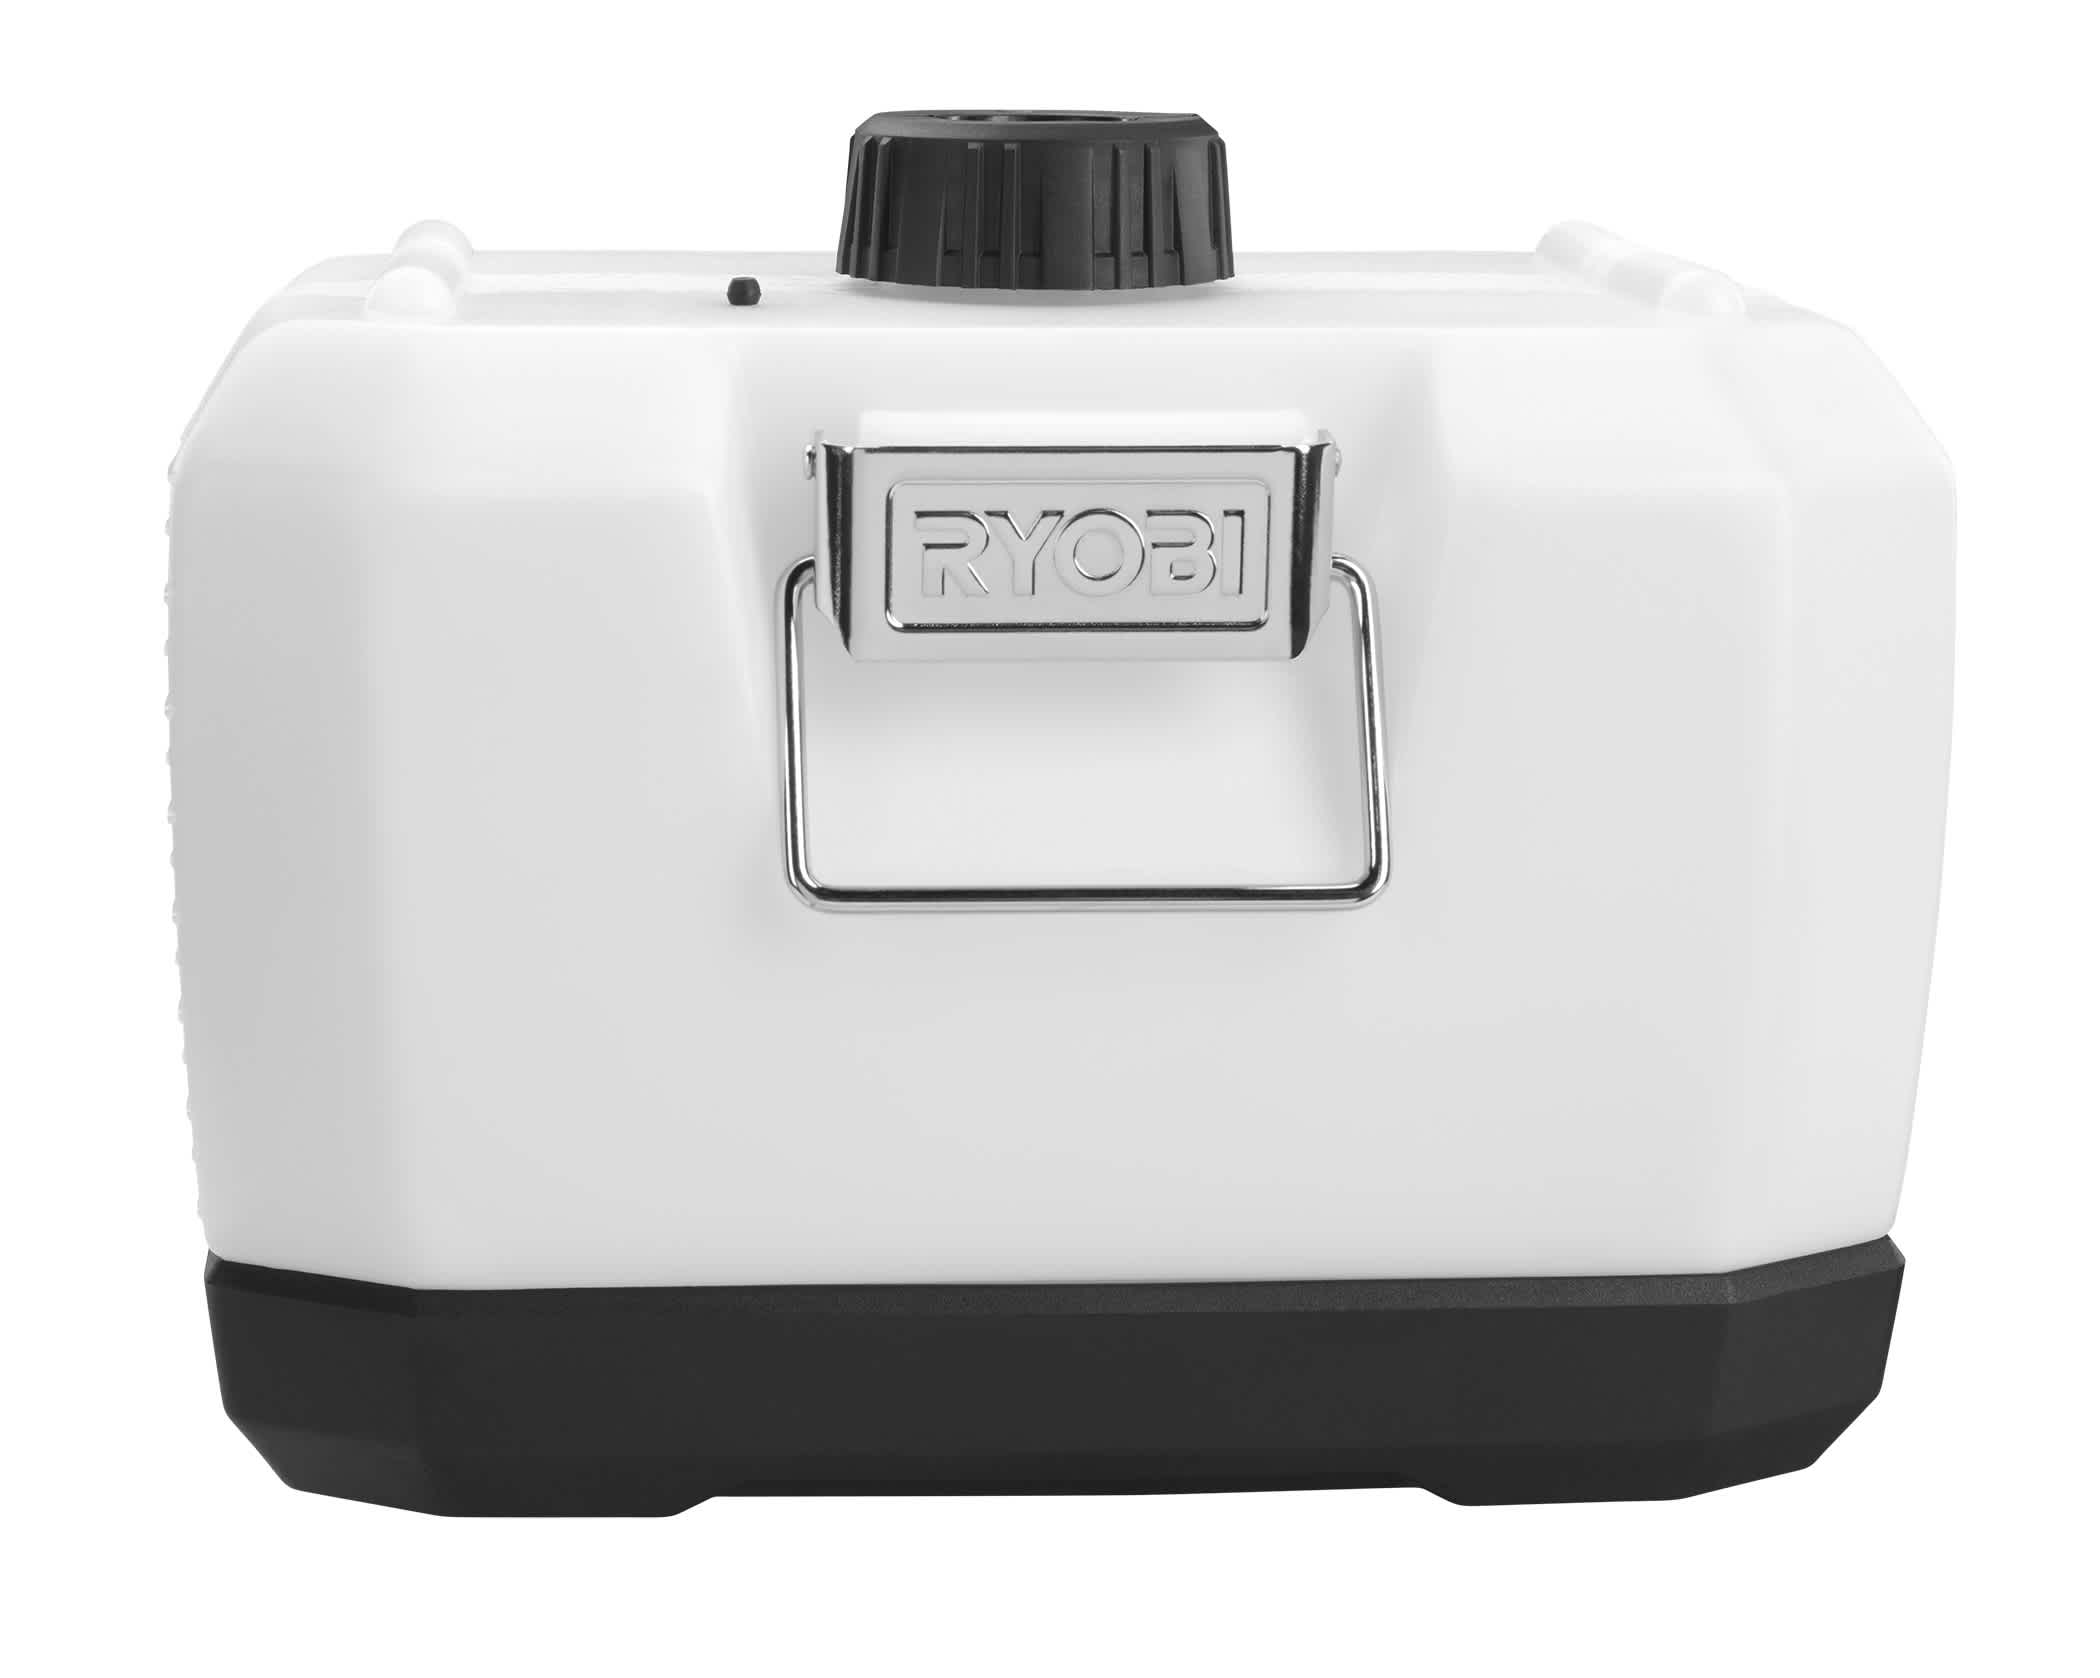 Product Features Image for 2 LITER REPLACEMENT TANK FOR THE 18V ONE+ HANDHELD ELECTROSTATIC SPRAYER.